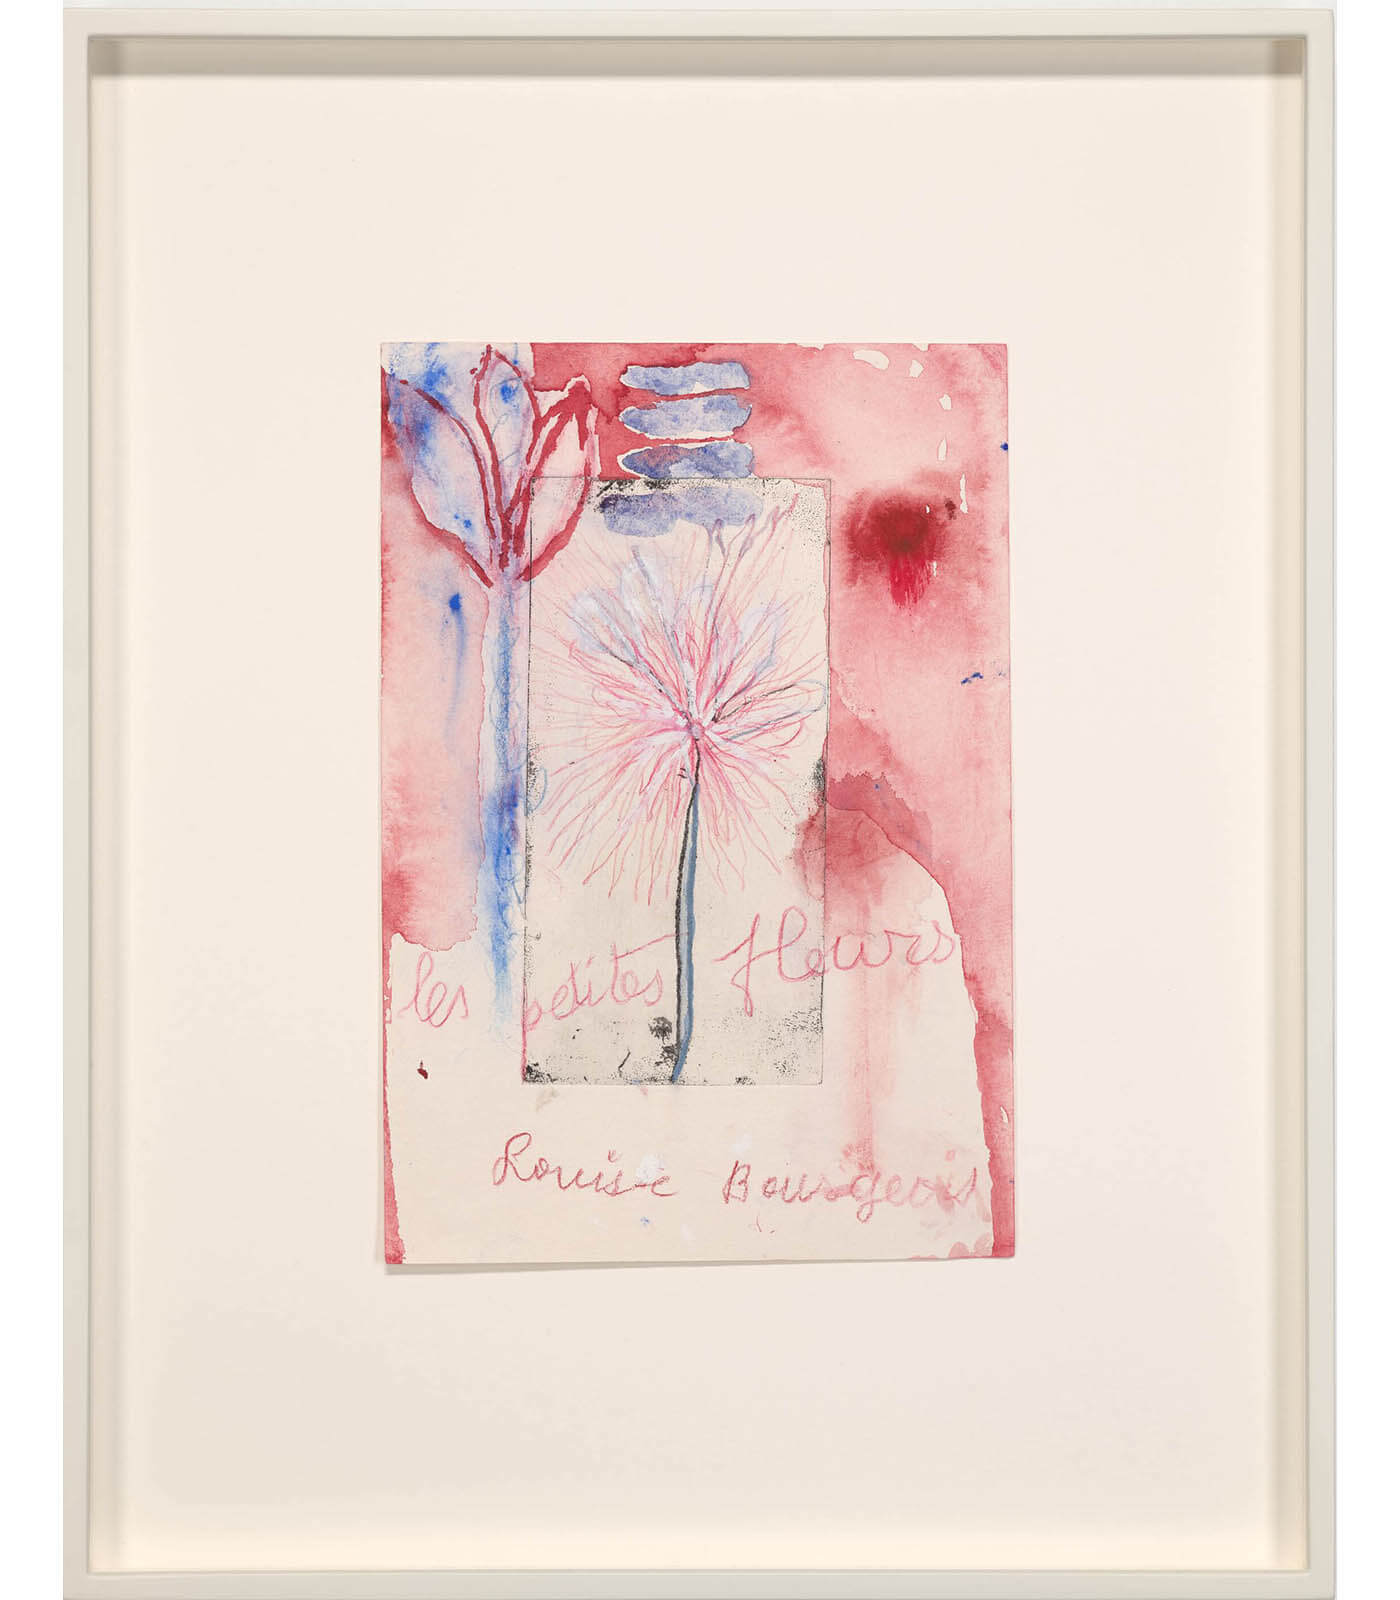 Louise Bourgeois' 'Drawings '47-'07' at hauserwirth.com – new york